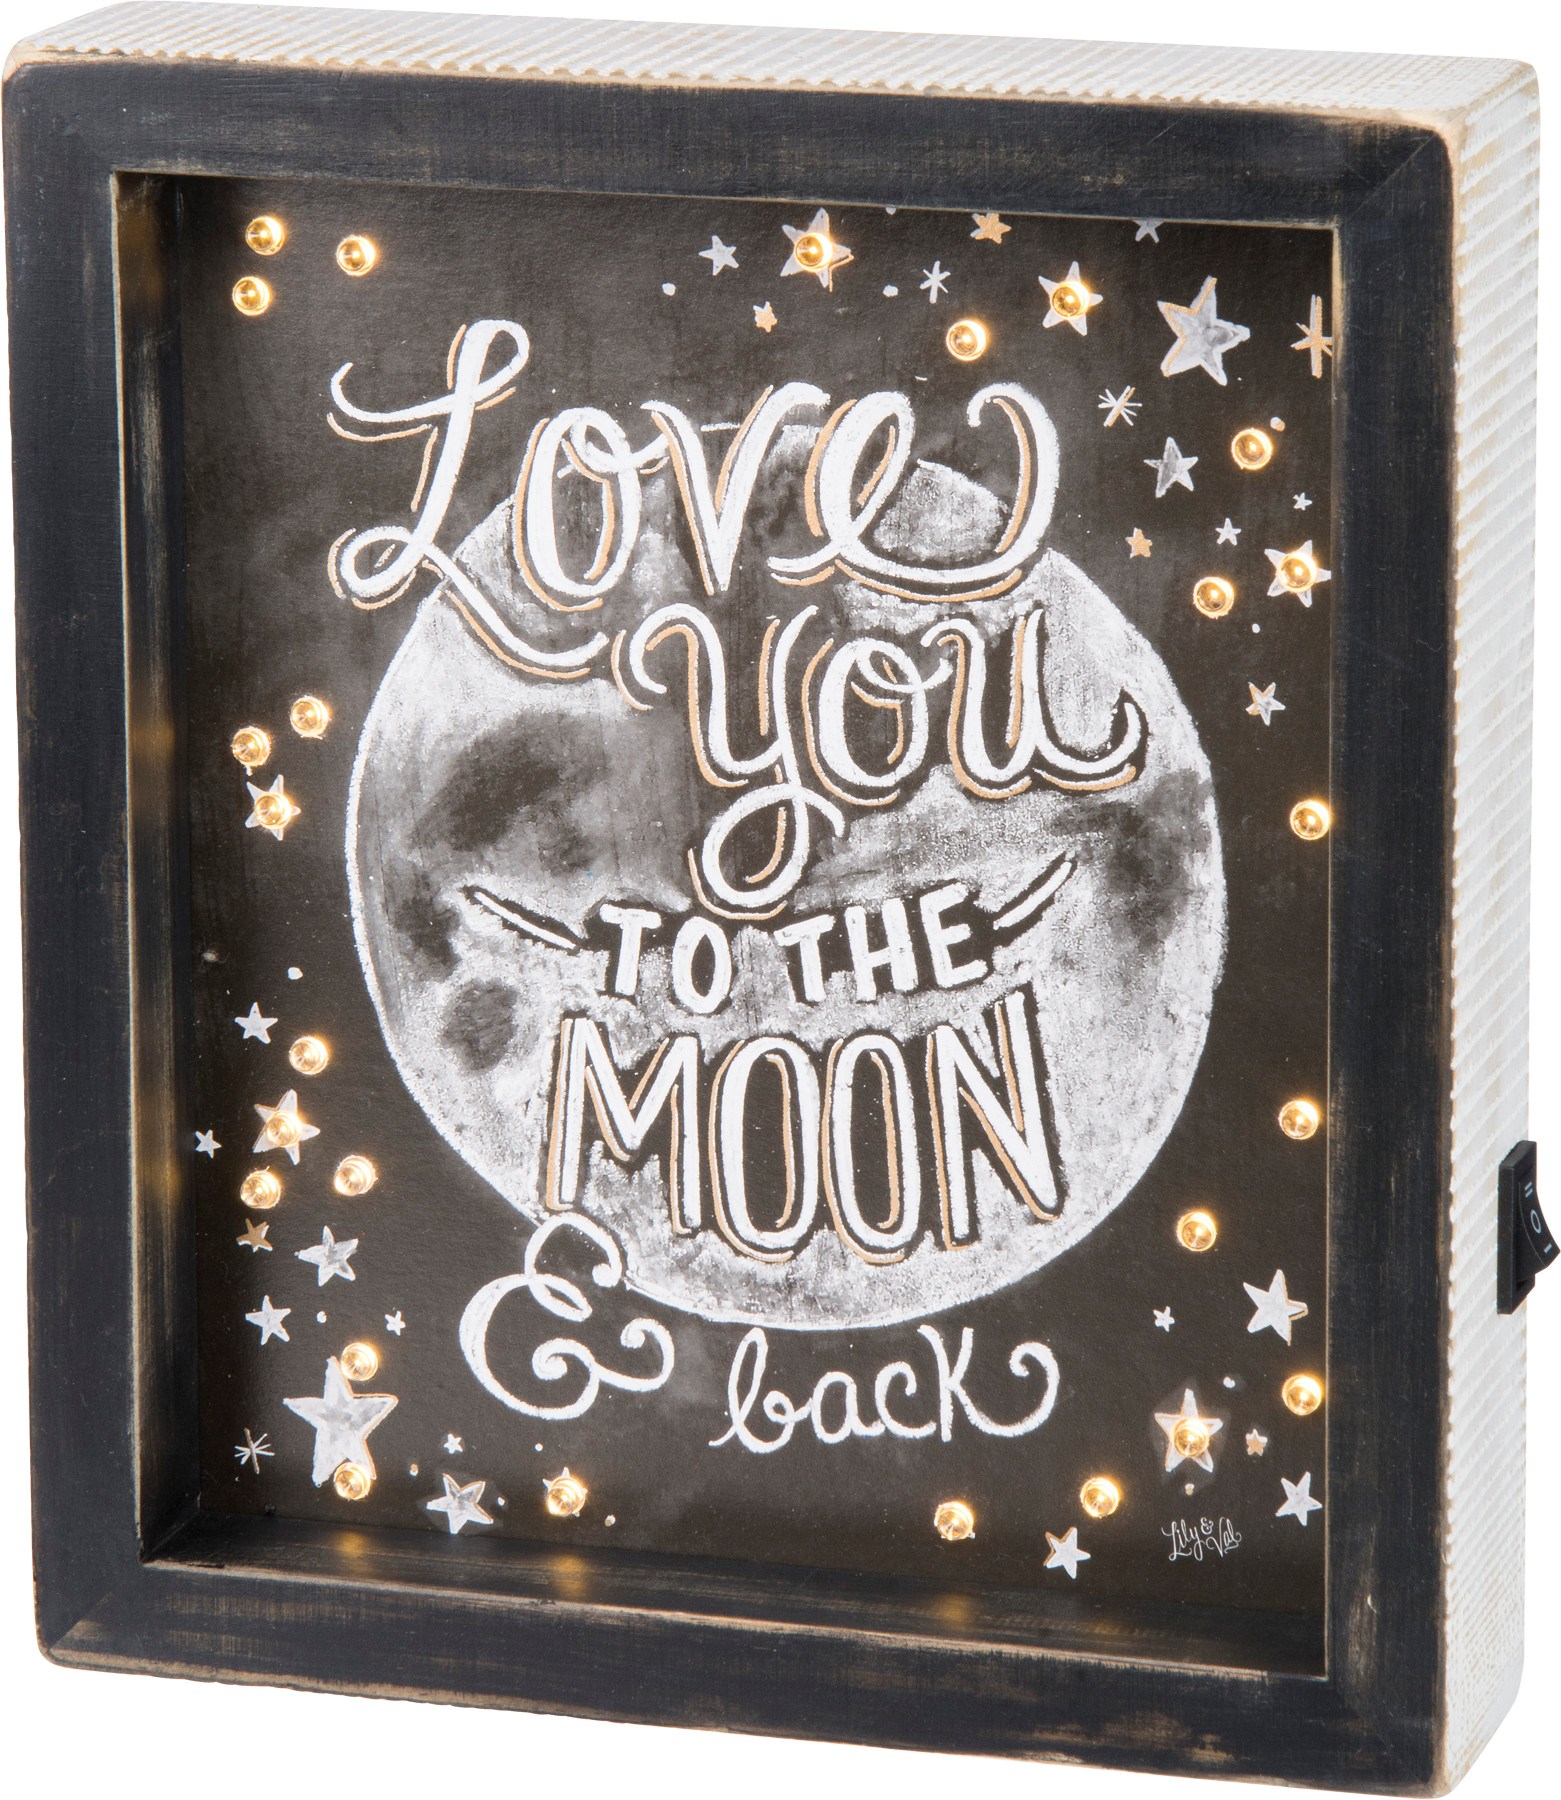 I LOVE YOU ALL THE WAY TO THE MOON AND BACK WOODEN CHIC N SHABBY HEART SIGN.